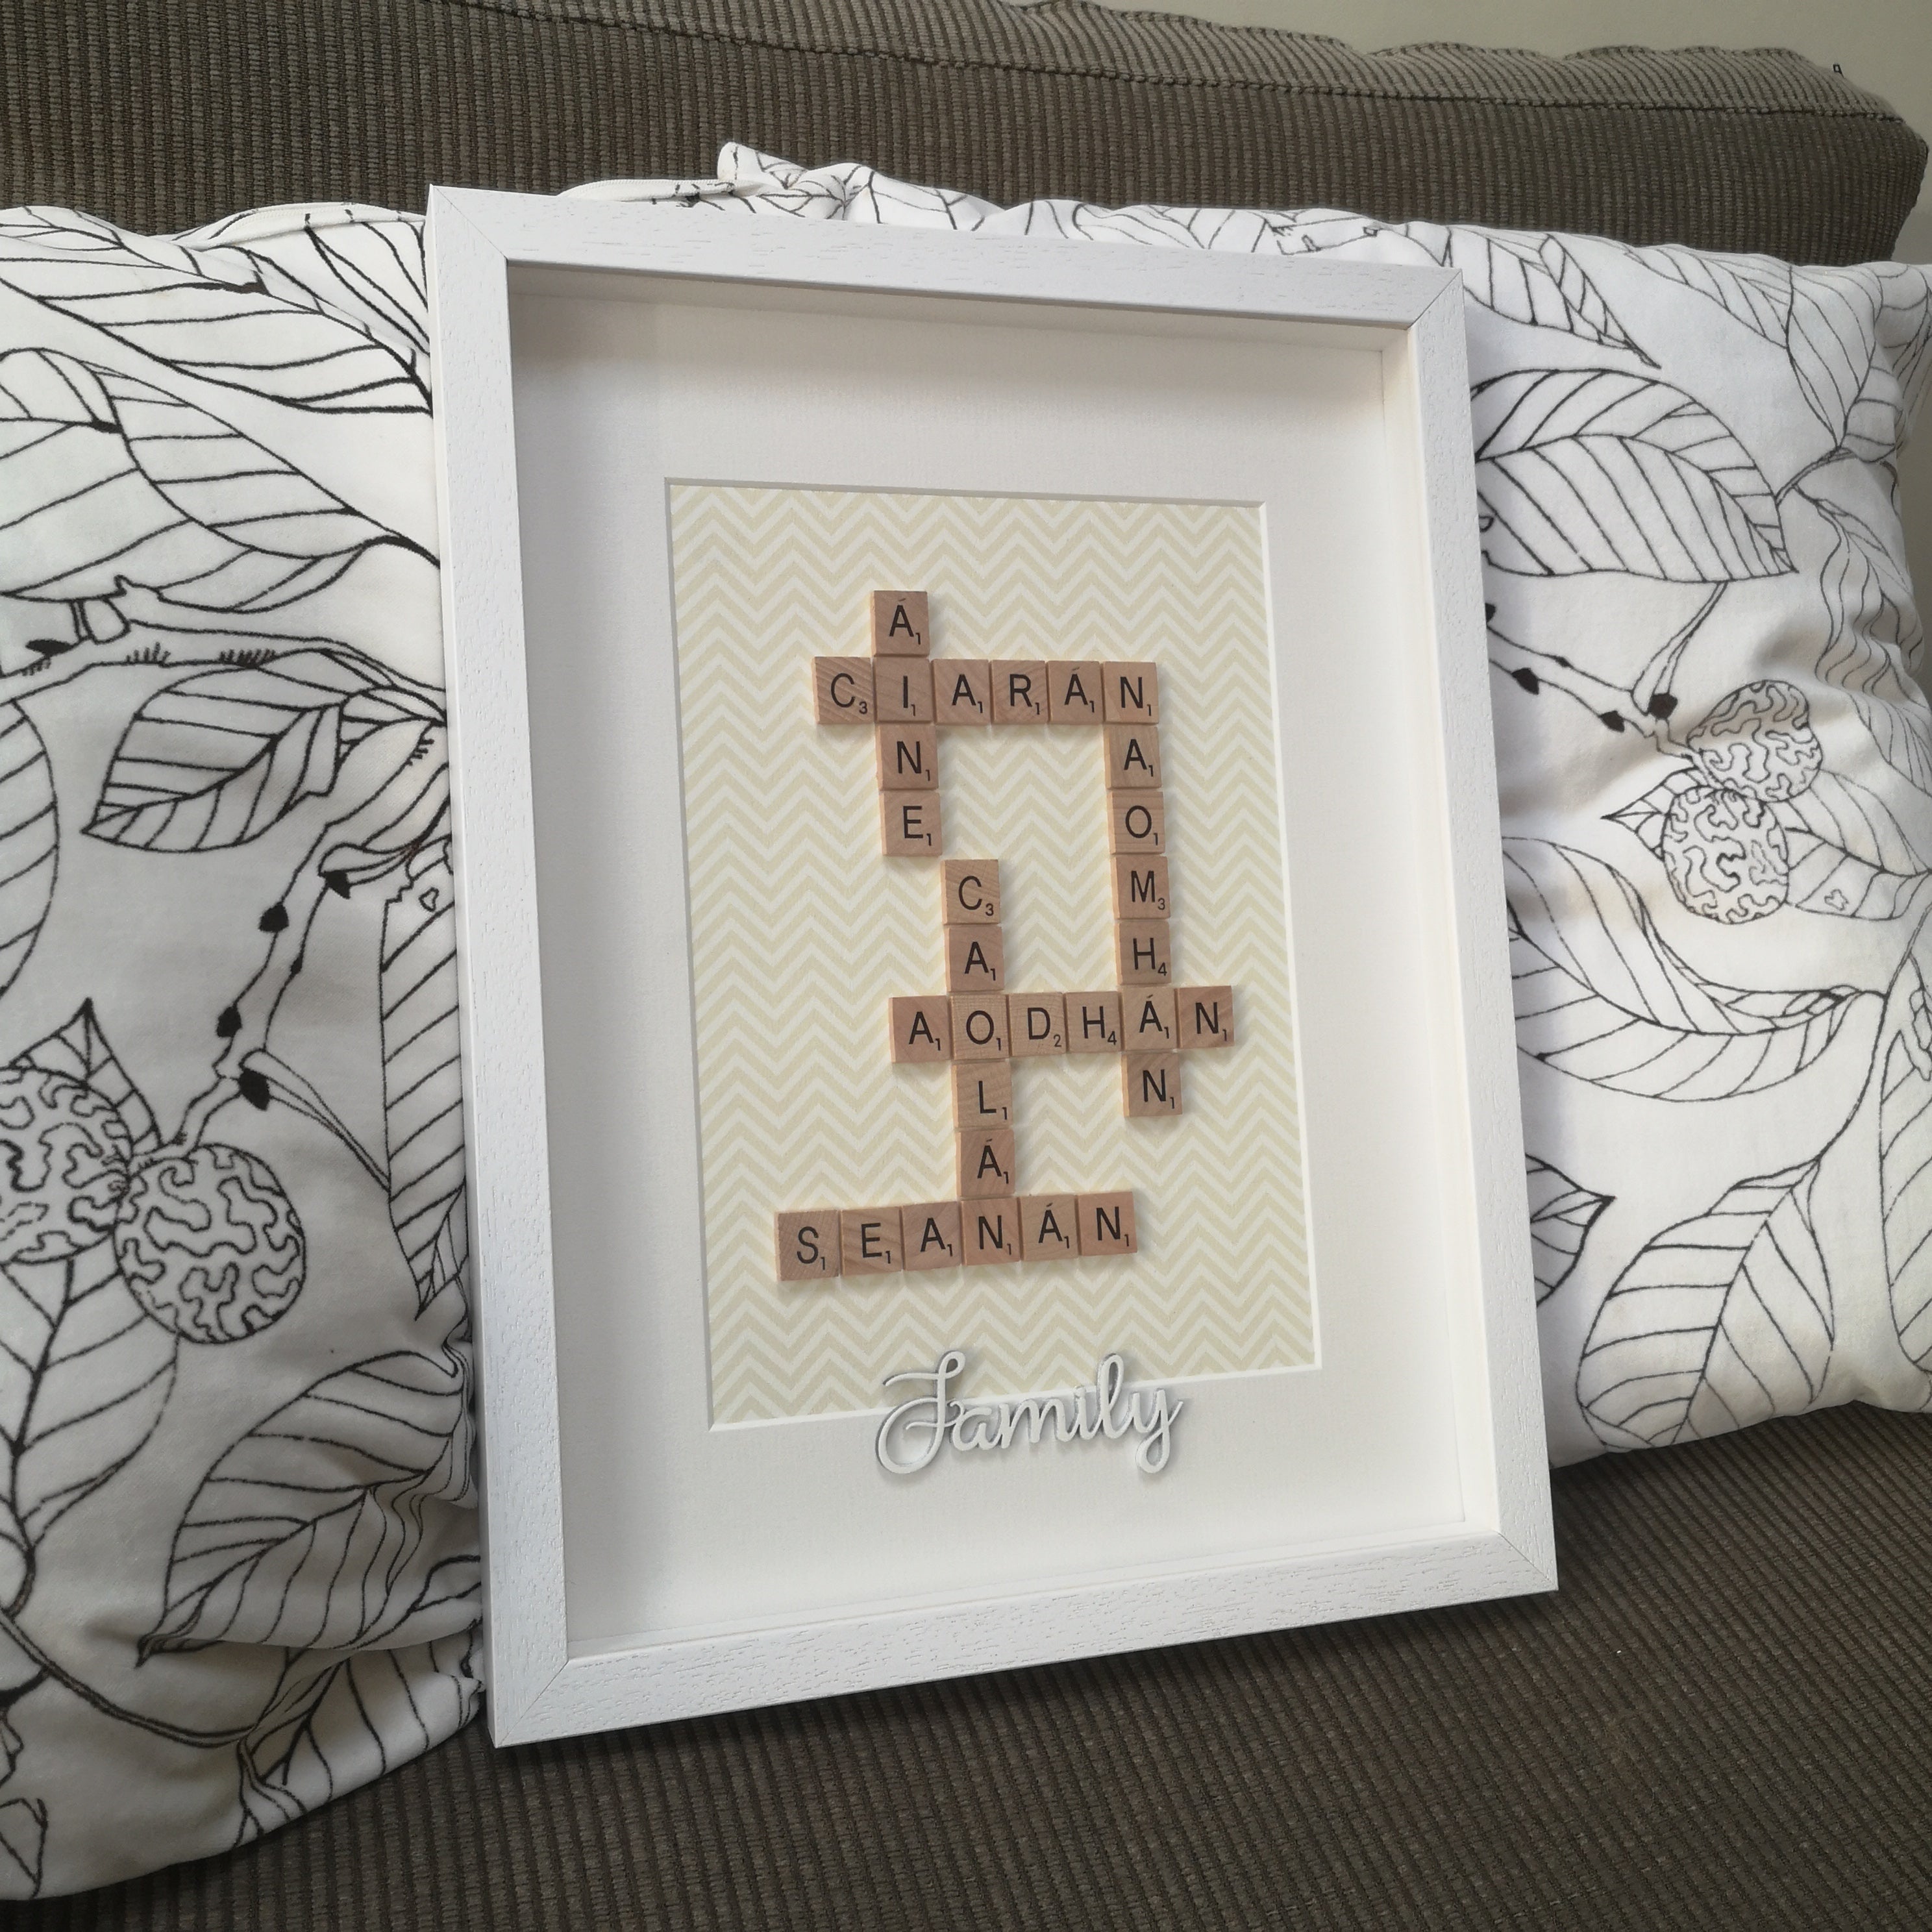 Personalised Family Scrabble name Frame with 6 names and wooden FAMILY on a yellow chevron background